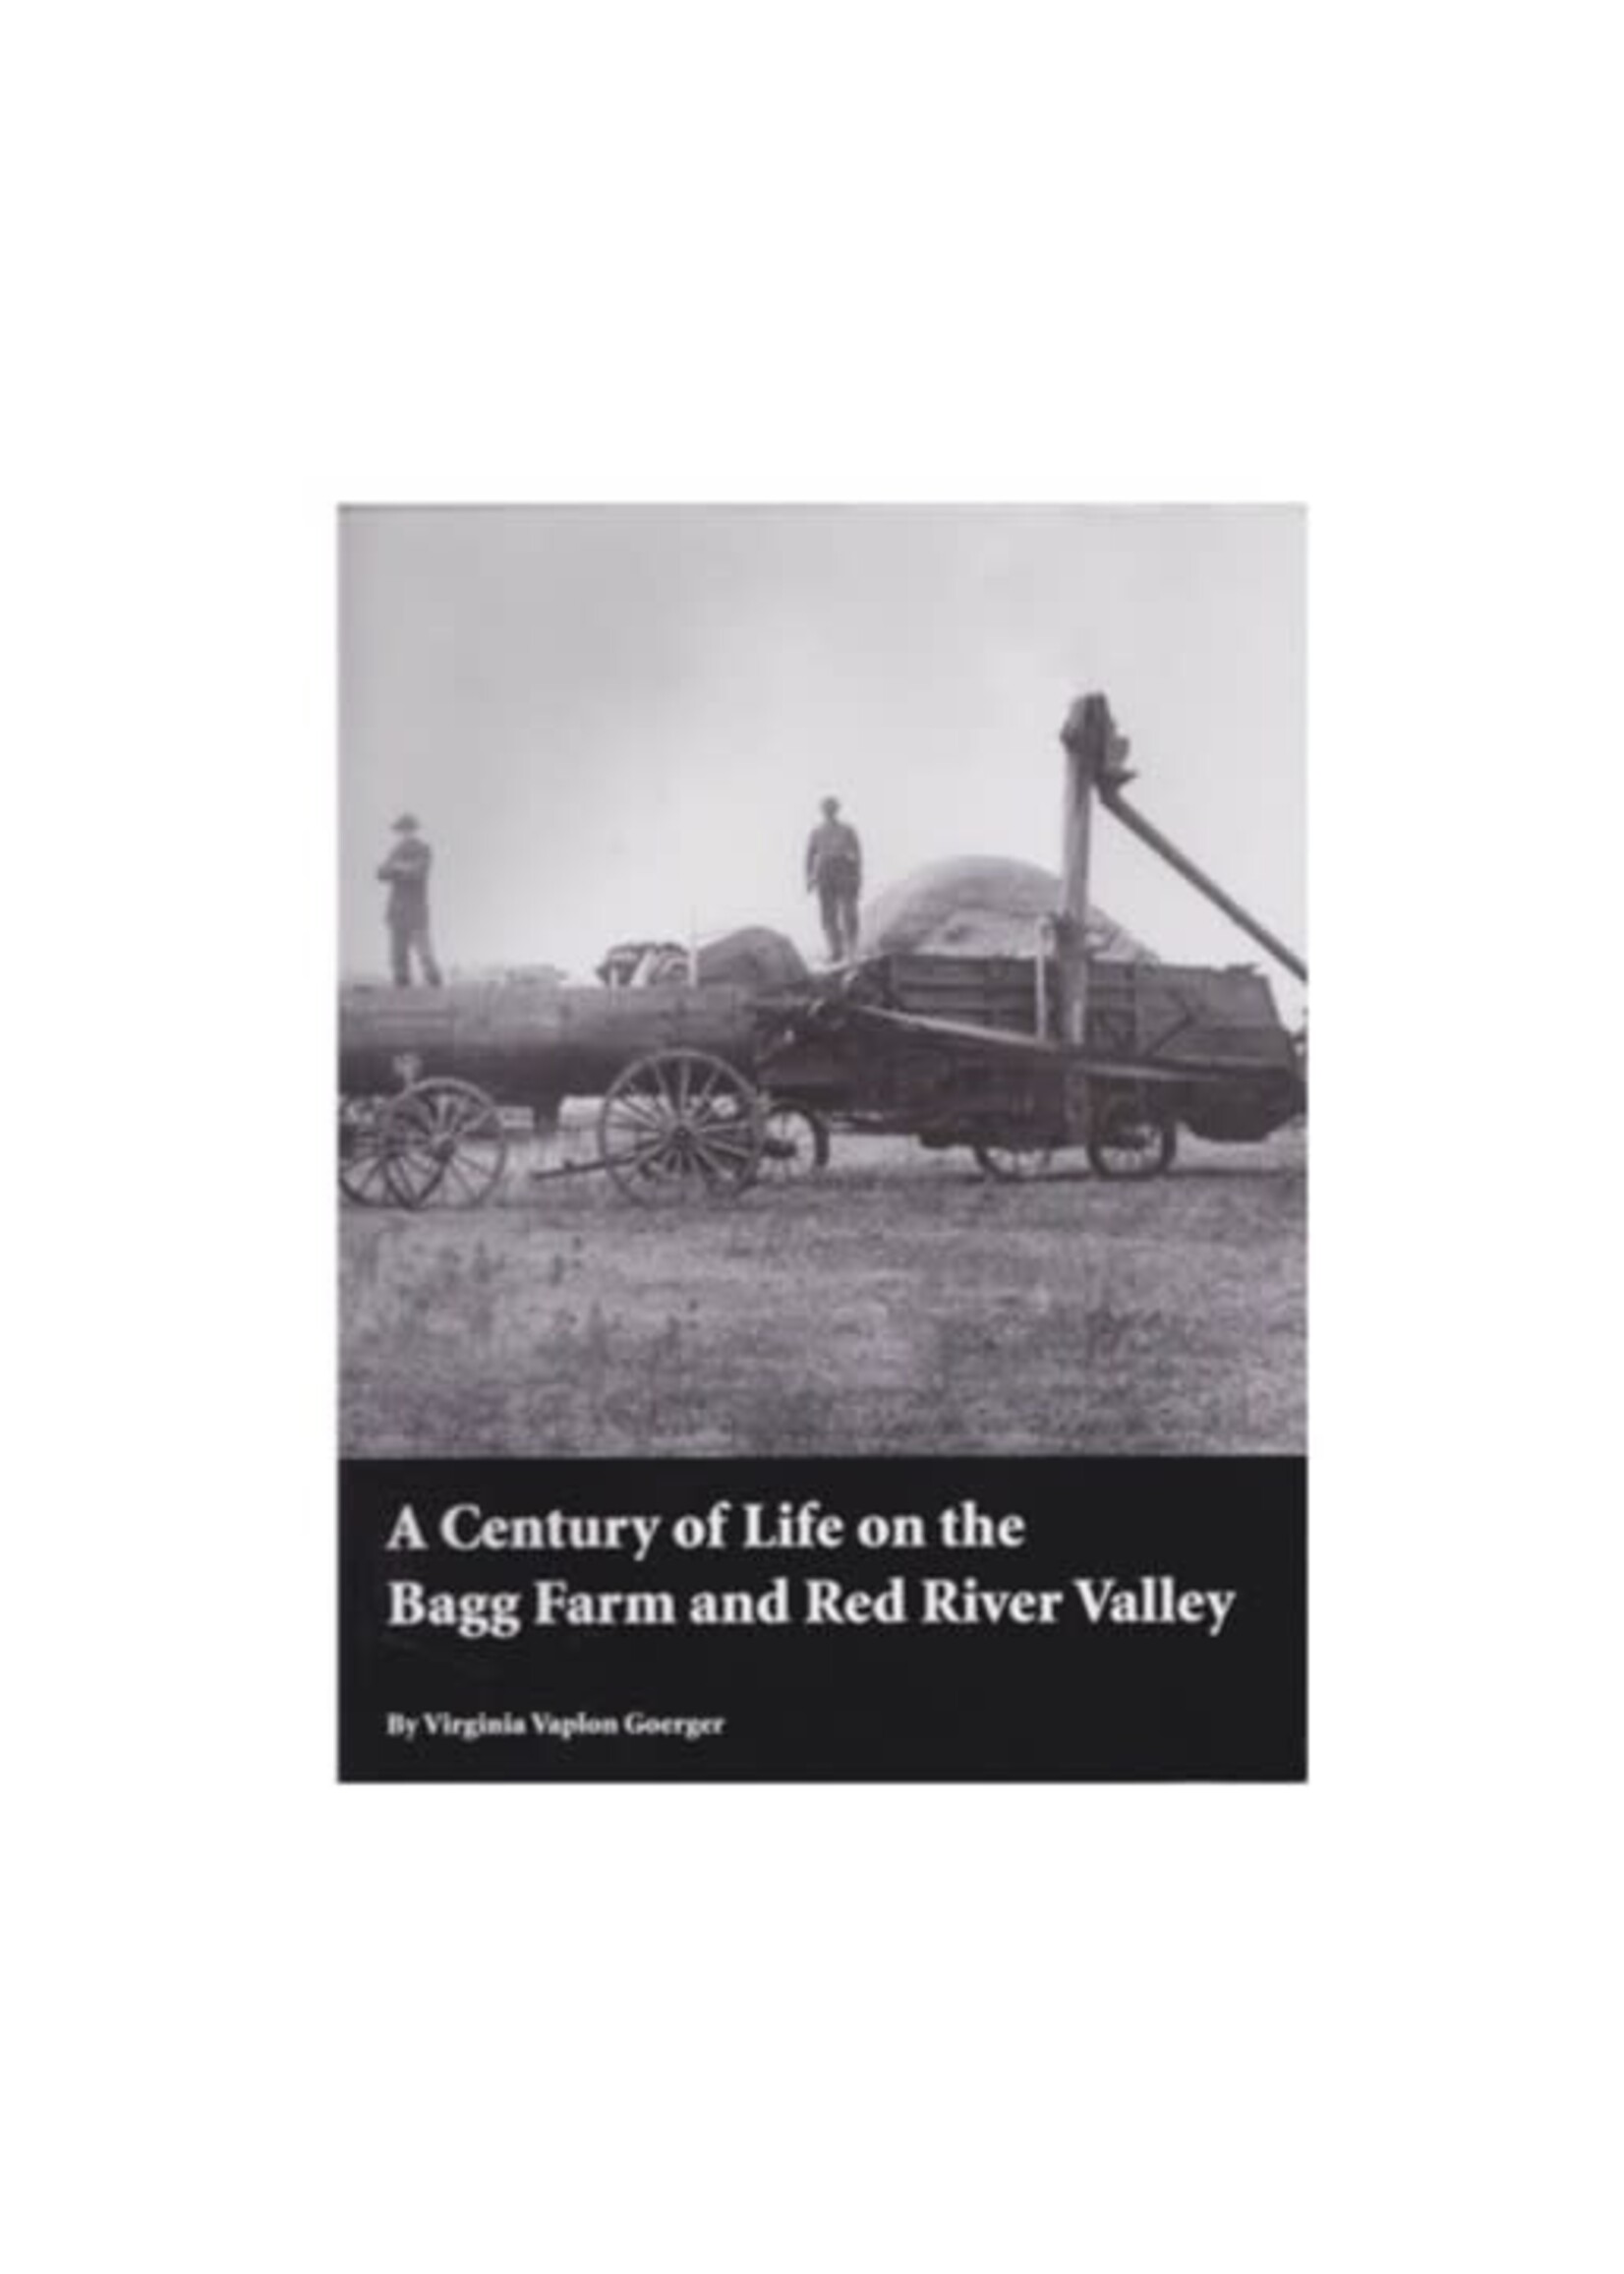 A Century of Life on the Bagg Farm and Red River Valley